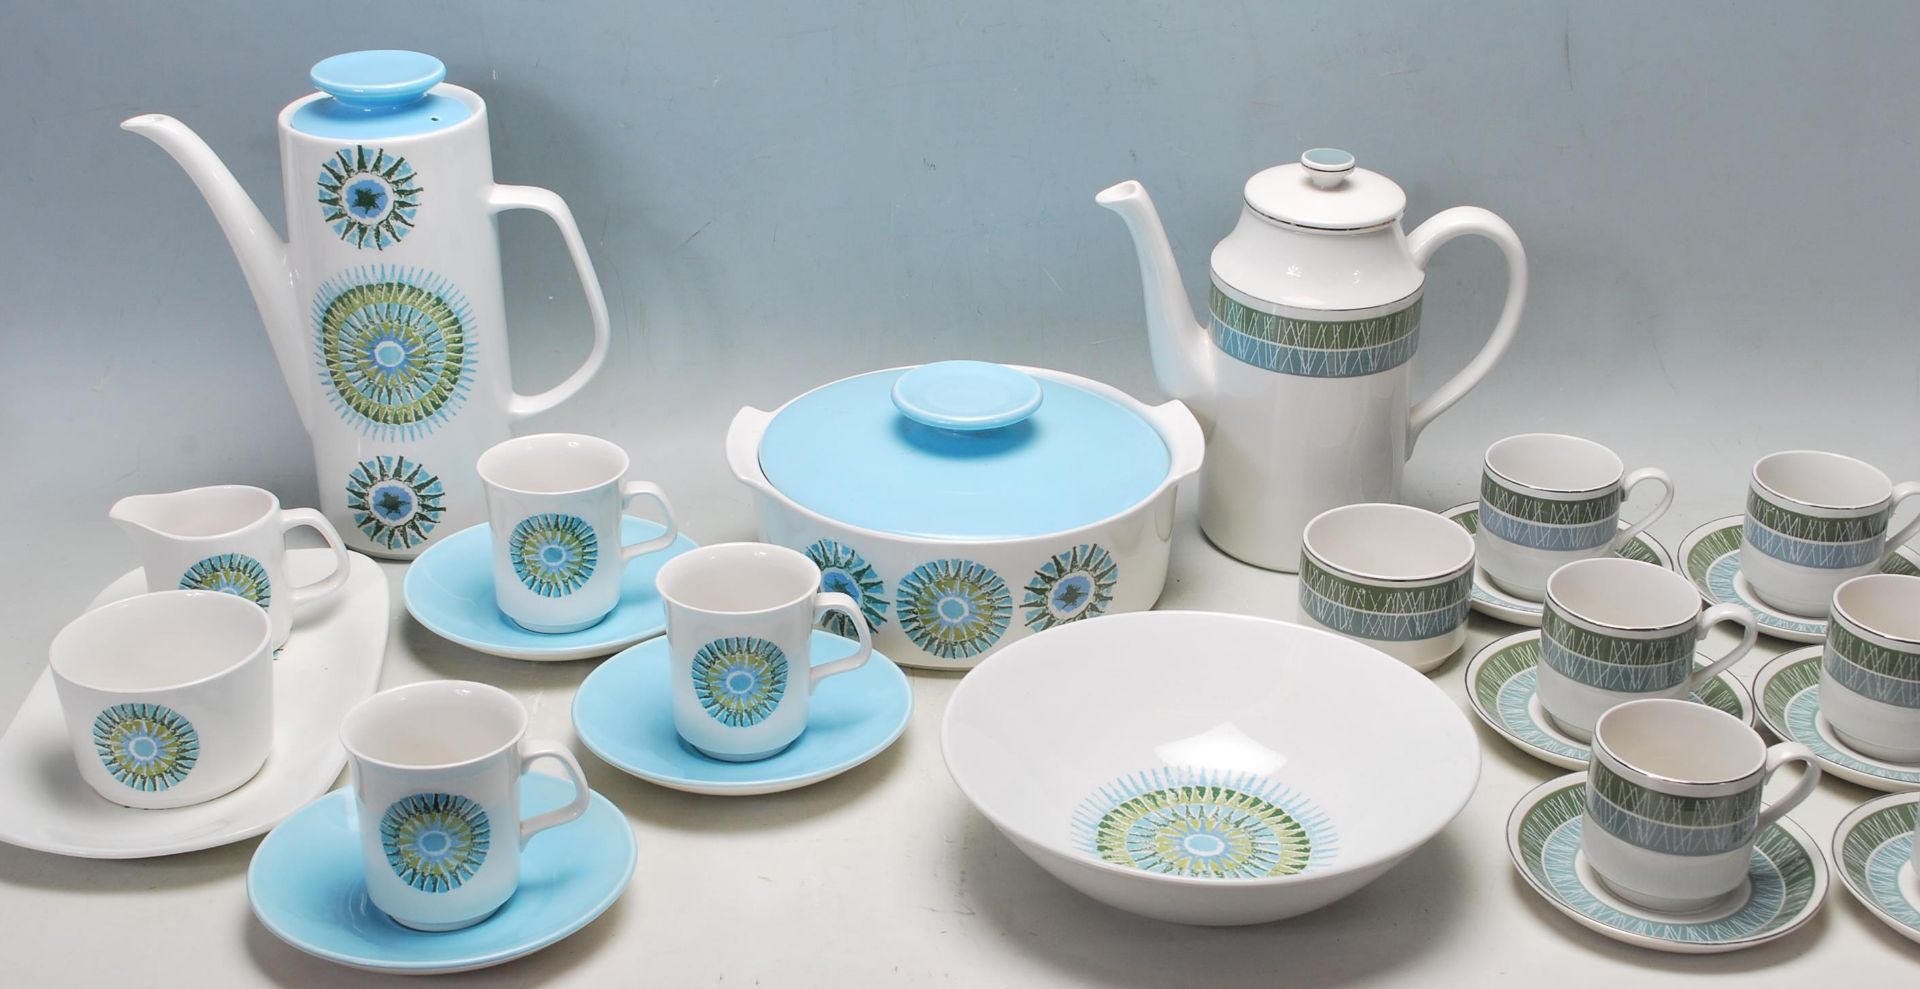 RETRO VINTAGE LATE 20TH CENTURY DINNER SERVICE BY MIDWINTER AND JG MEAKIN STUDIO.